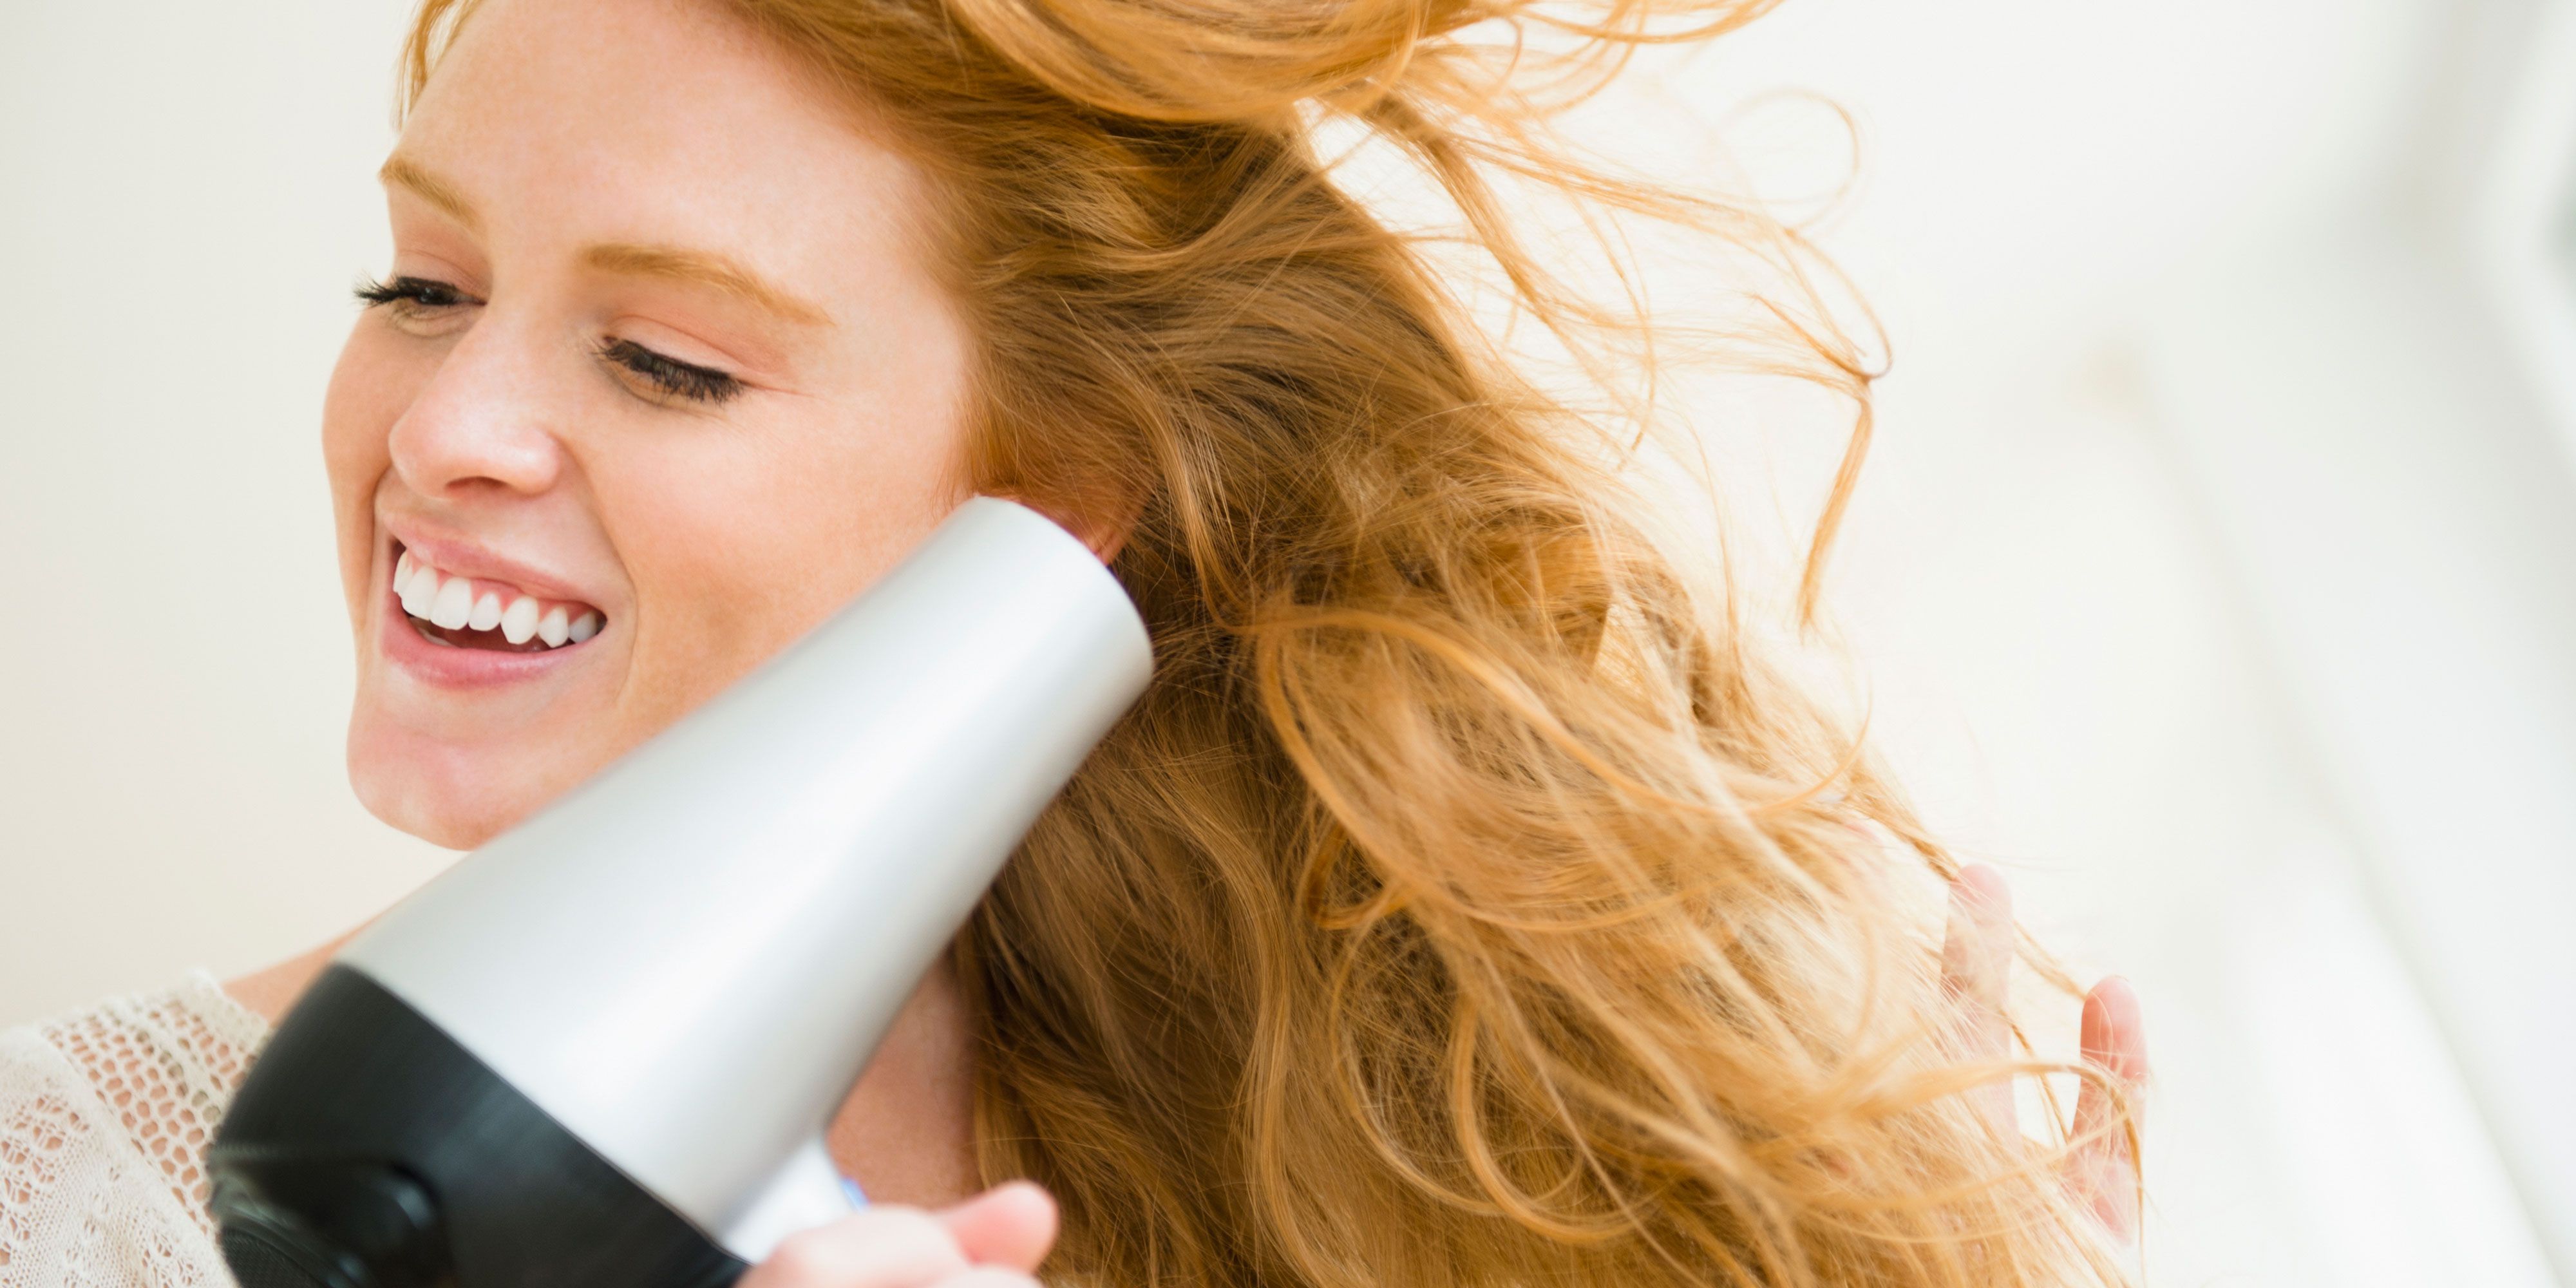 16 myths and facts about healthy hair that you need to know about